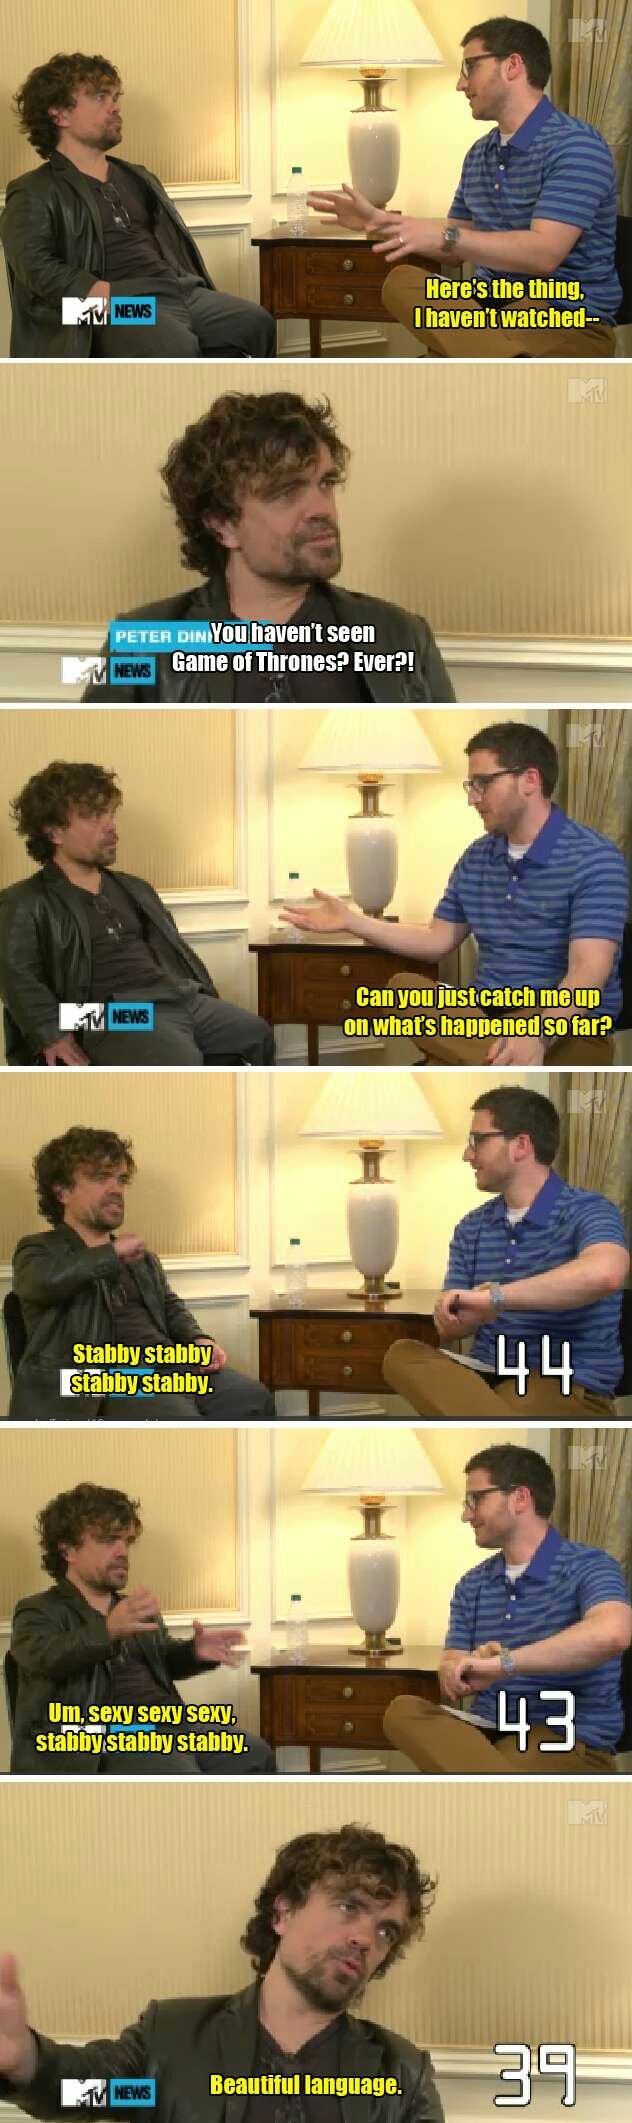 Peter Dinklage catches you up on Game of Thrones  - meme